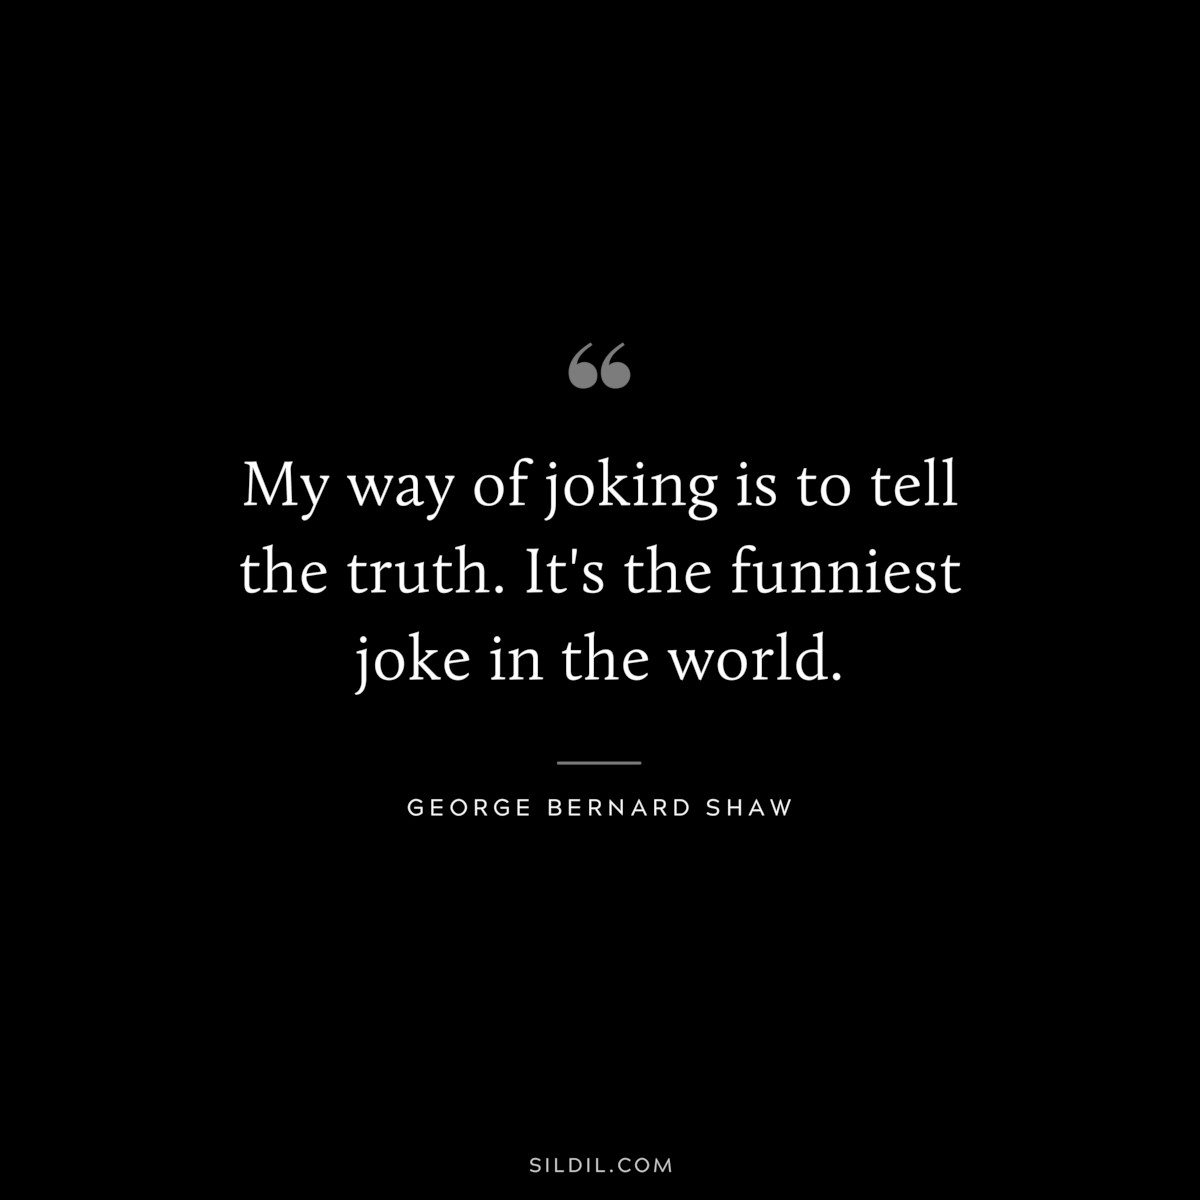 My way of joking is to tell the truth. It's the funniest joke in the world. ― George Bernard Shaw